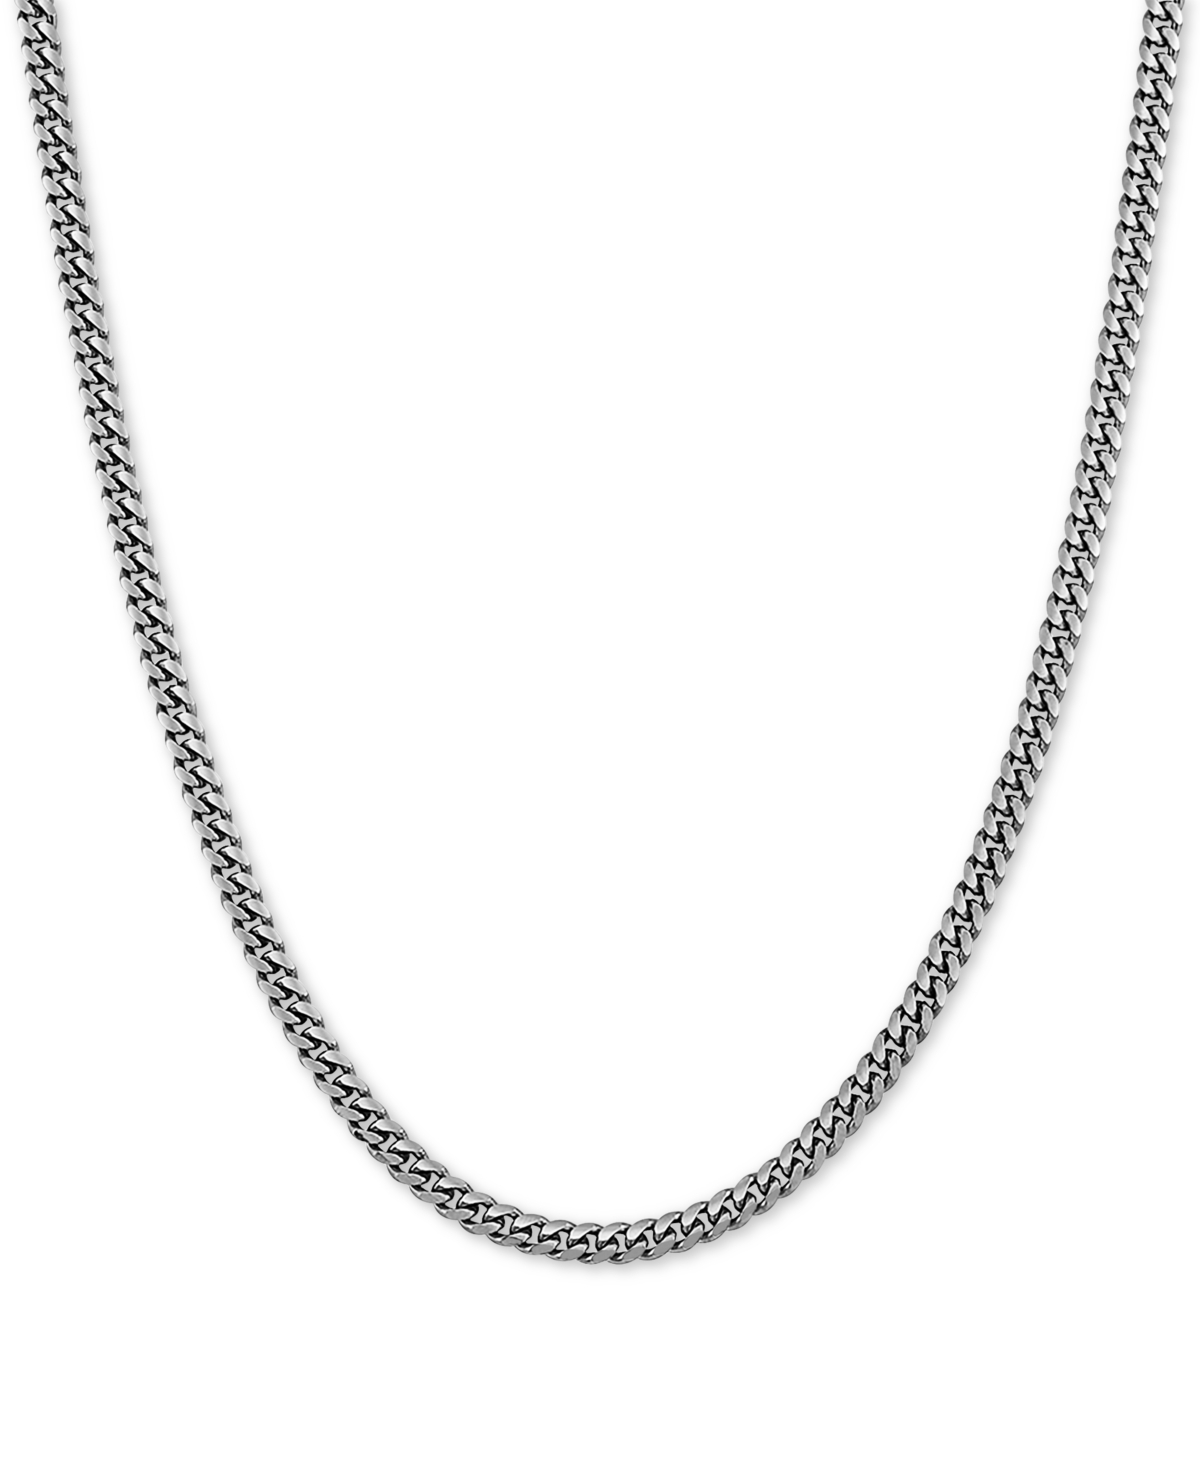 Macy's Cuban Link 22" Chain Necklace in Sterling Silver